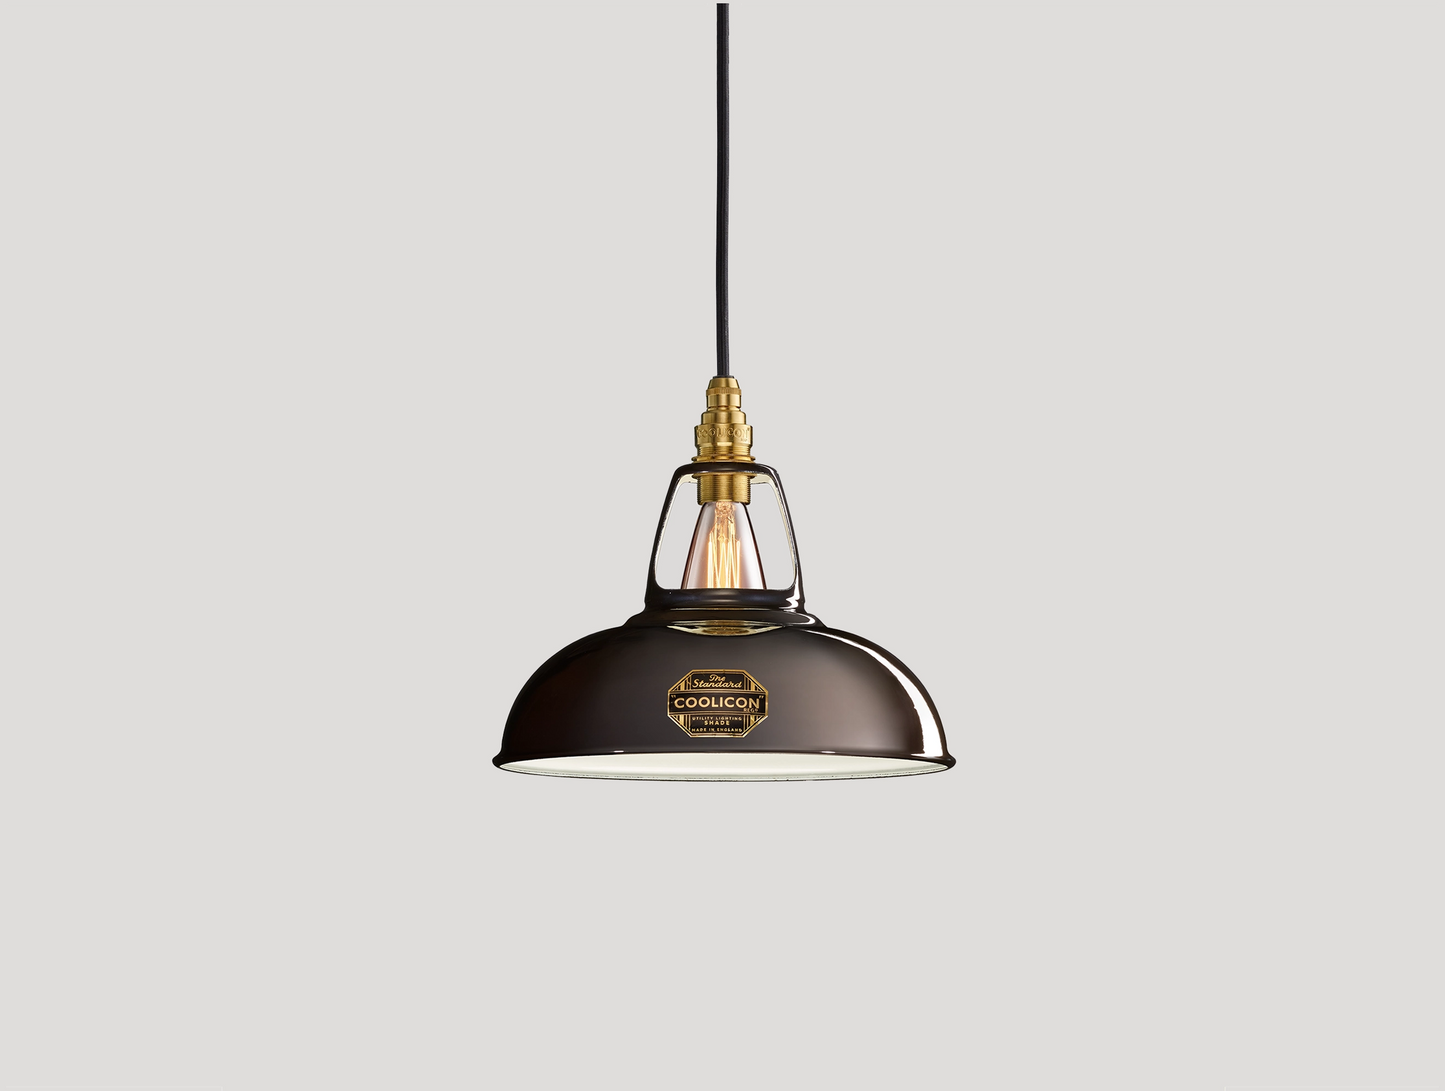 Pewter Coolicon lampshade with a Signature Brass pendant set over a light grey background